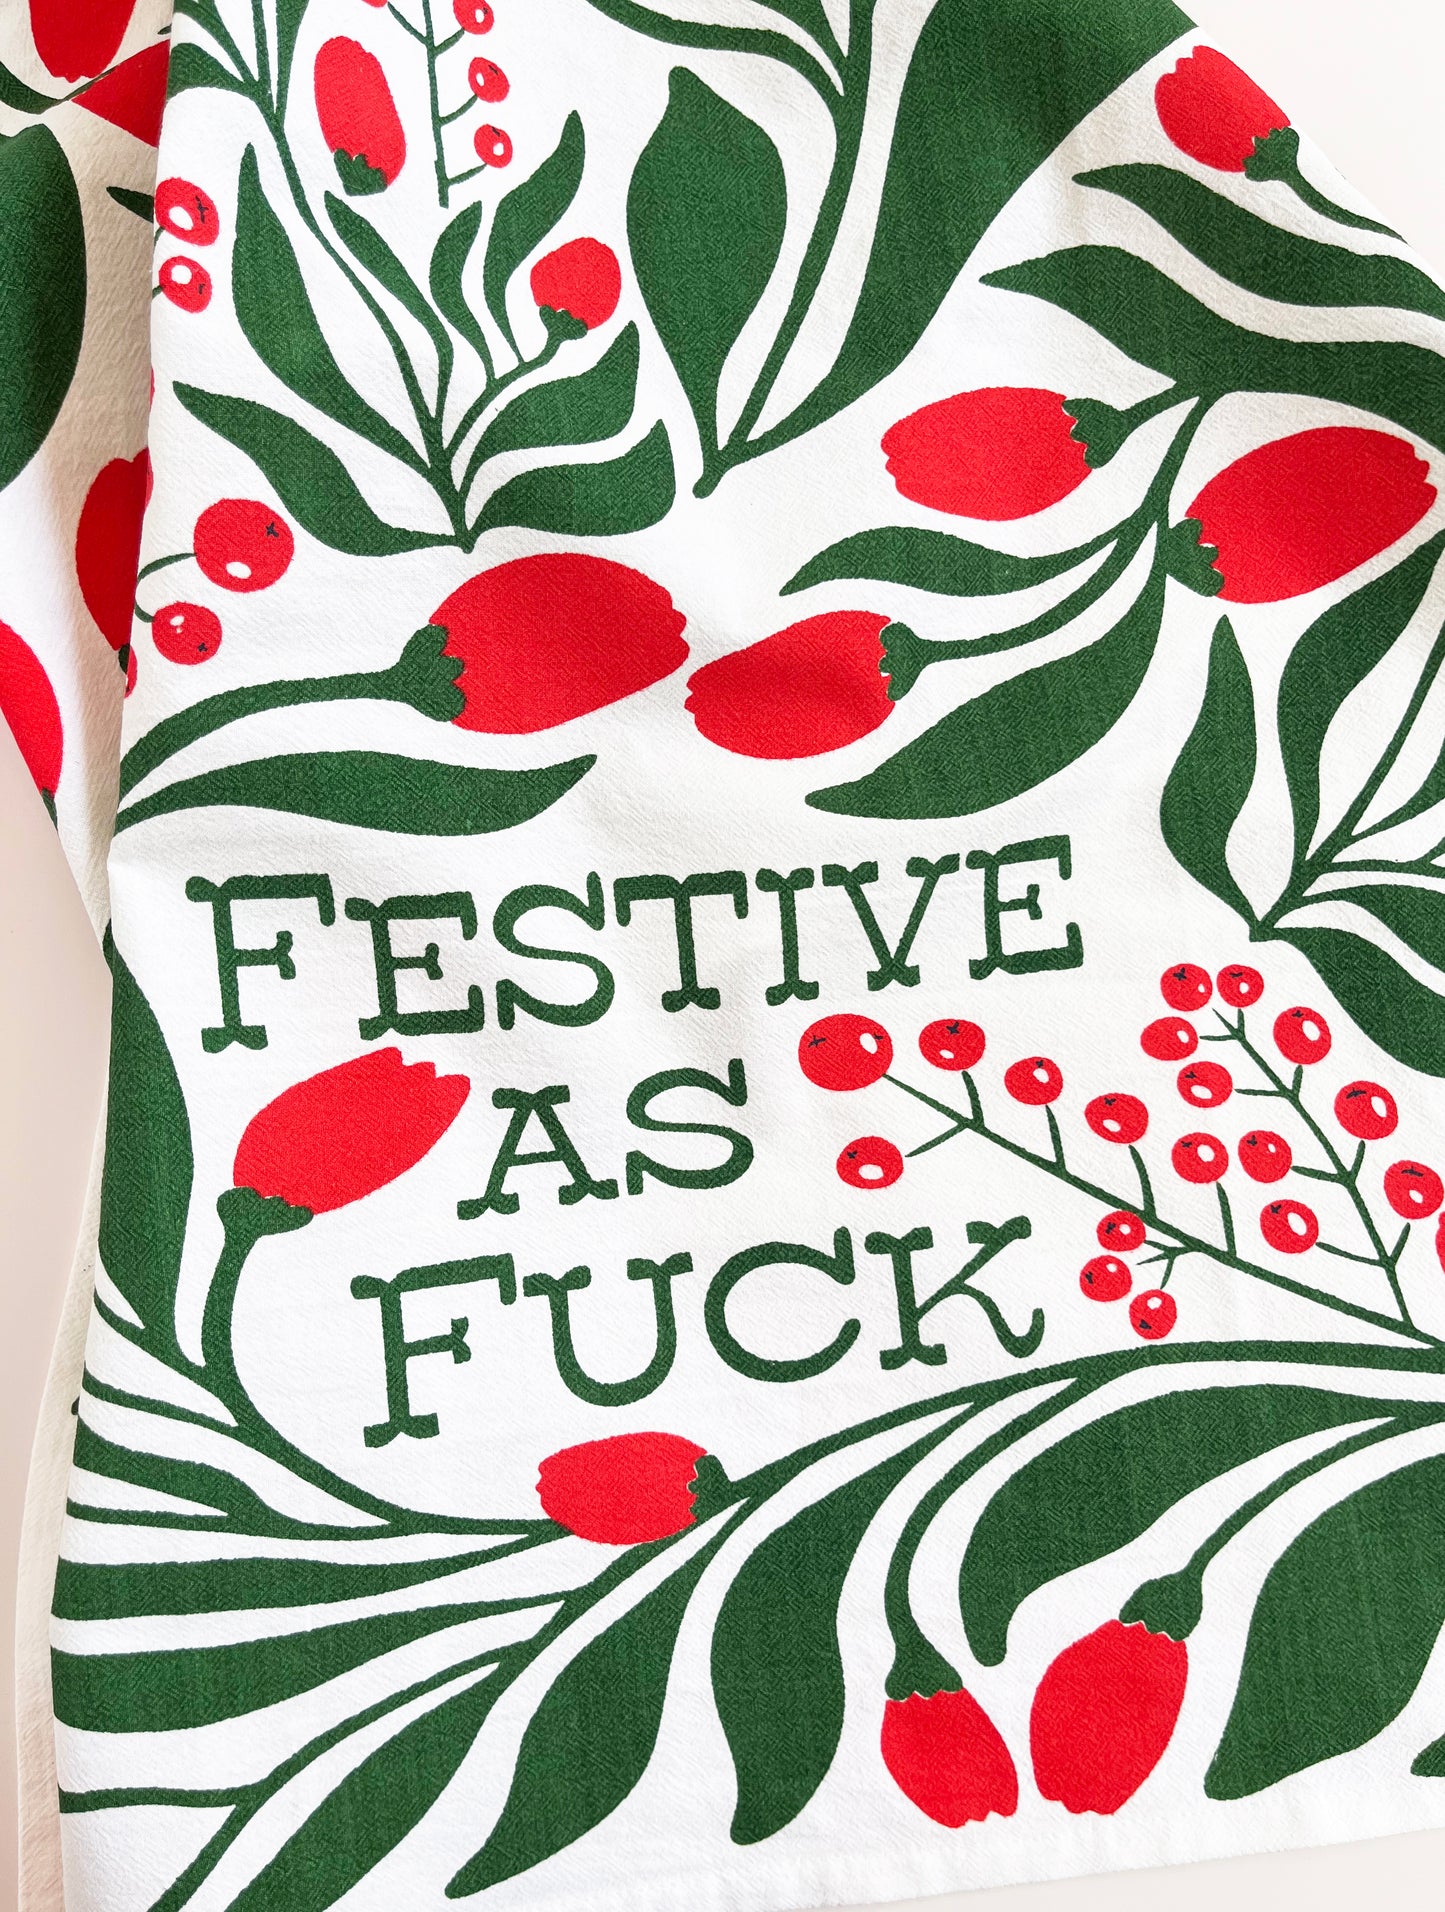 Festive As Fuck Red and Green Floral Print Funny Holiday Kitchen Towel